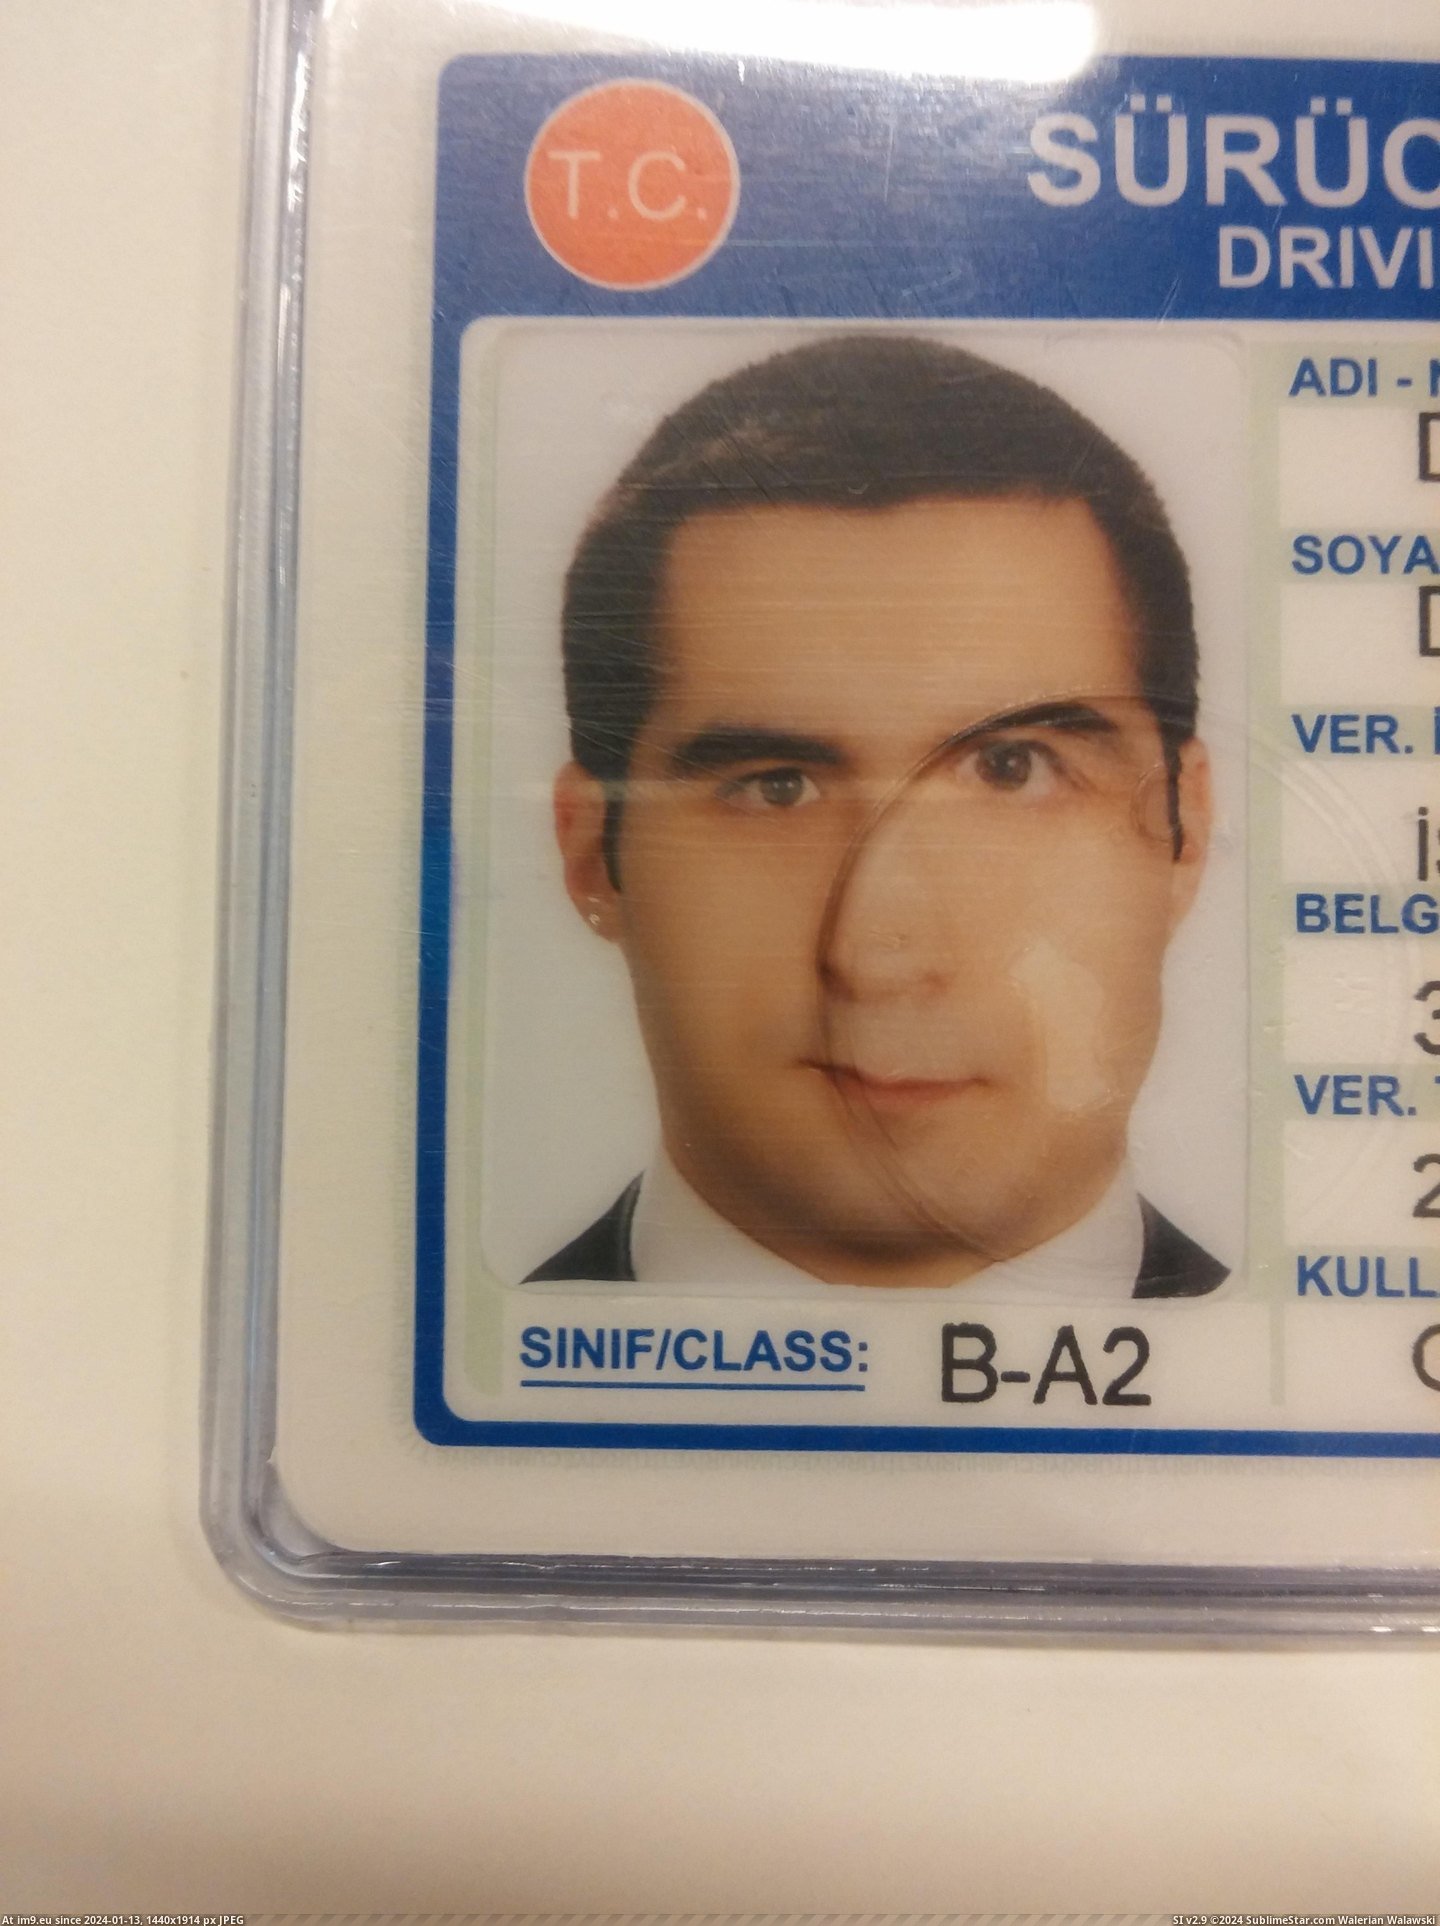 #Cold #Driving #Stamped #Quasimido #Renew #Idiot #License [Pics] Had to renew my driving license; thanks to the idiot that cold stamped my new license, I'm now Quasimido... Pic. (Image of album My r/PICS favs))